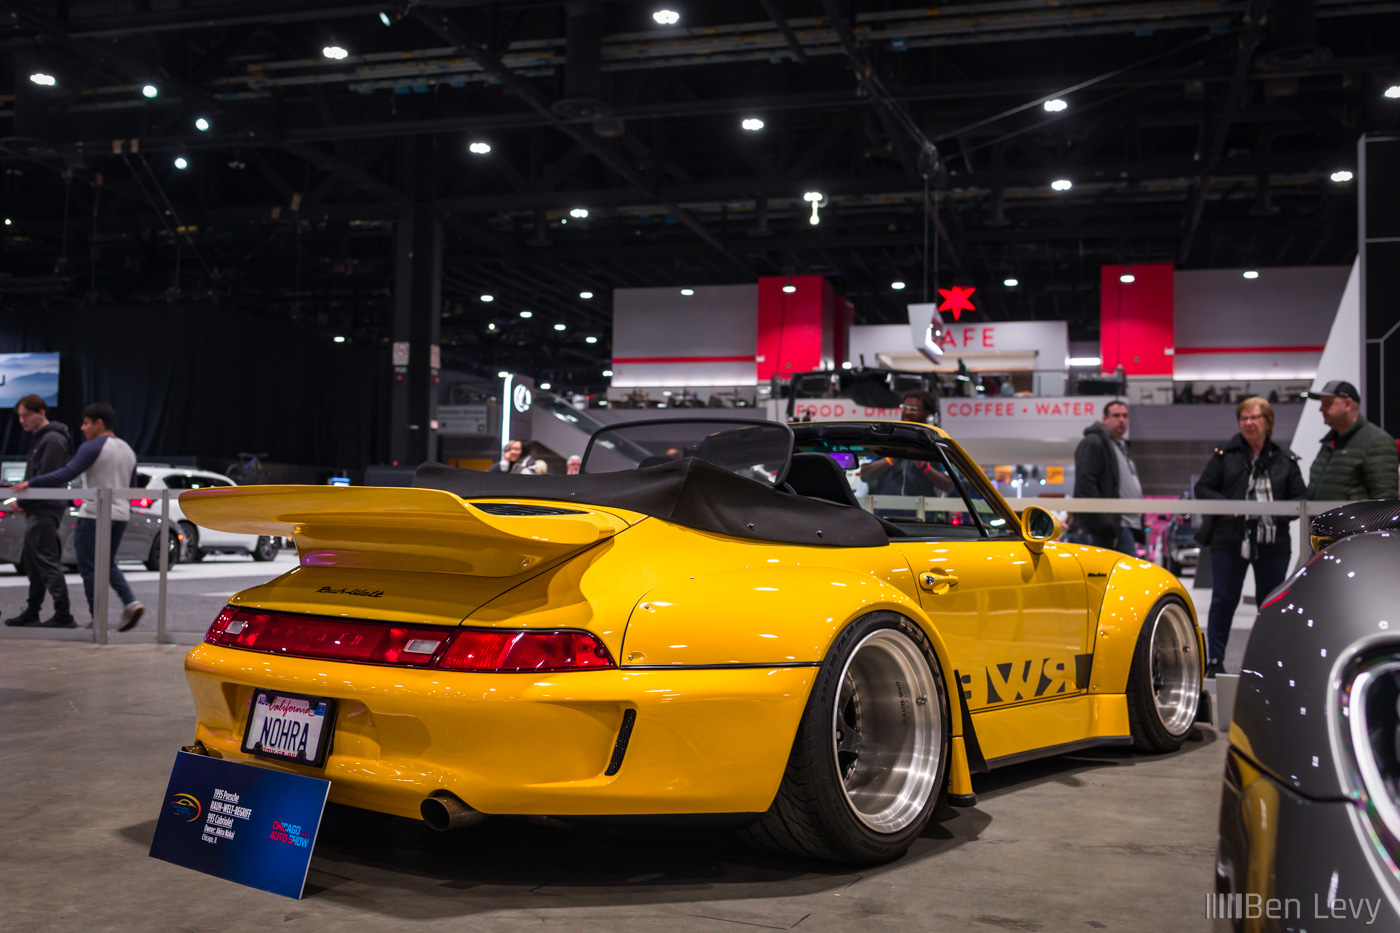 RWB Nohra at the Chitown Exotics Car Group Section at the Chicago Auto Show